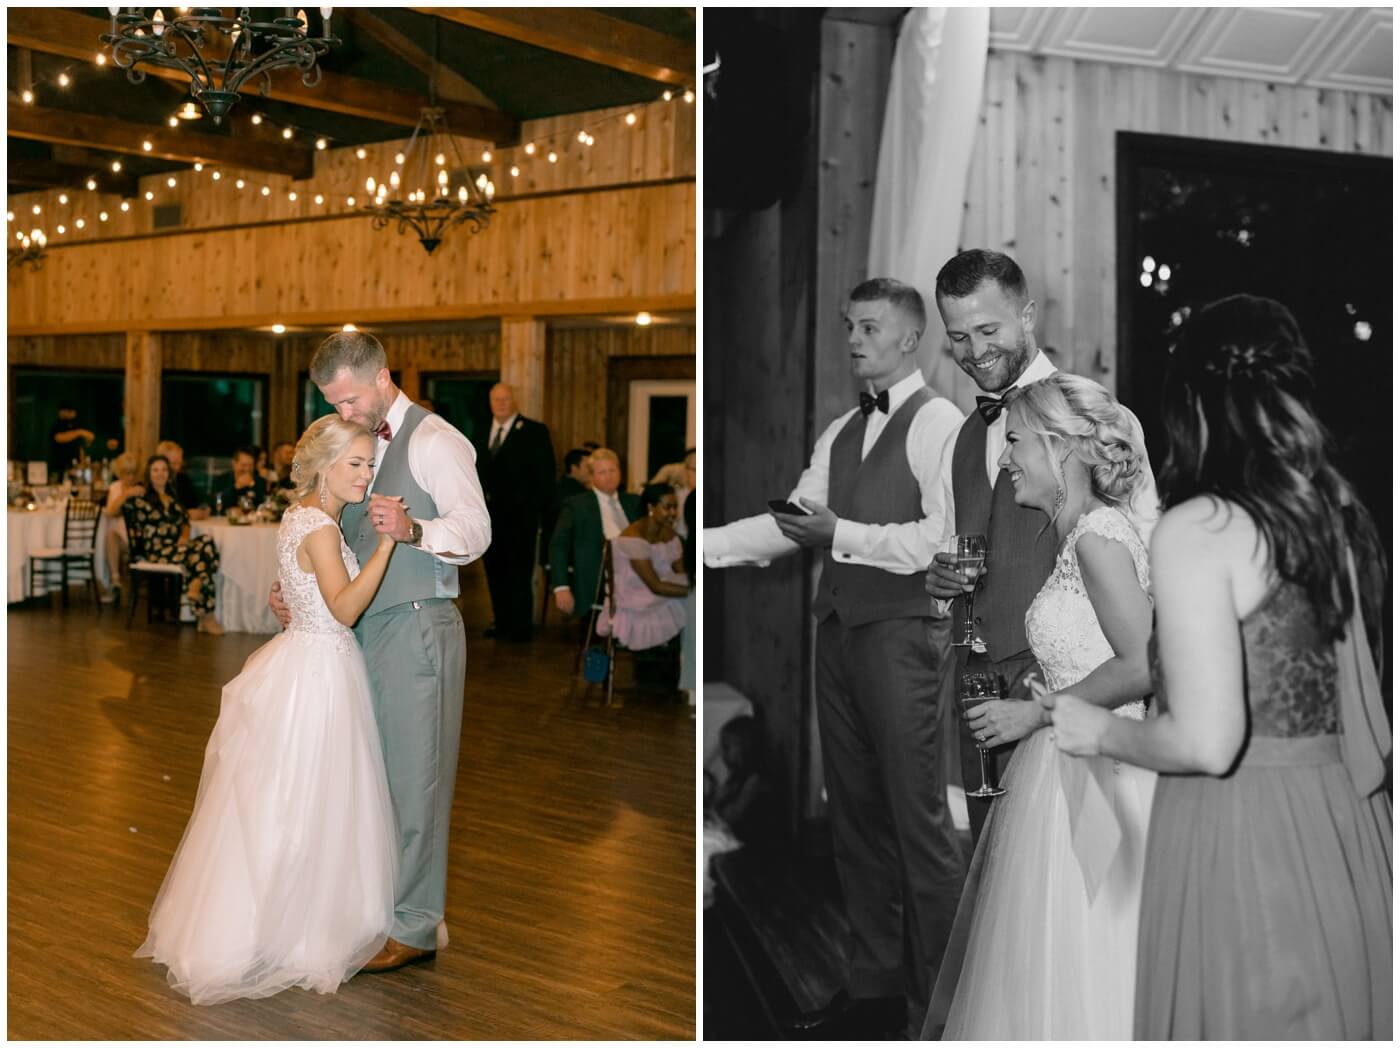 the bride and groom smile as they share a first dance 